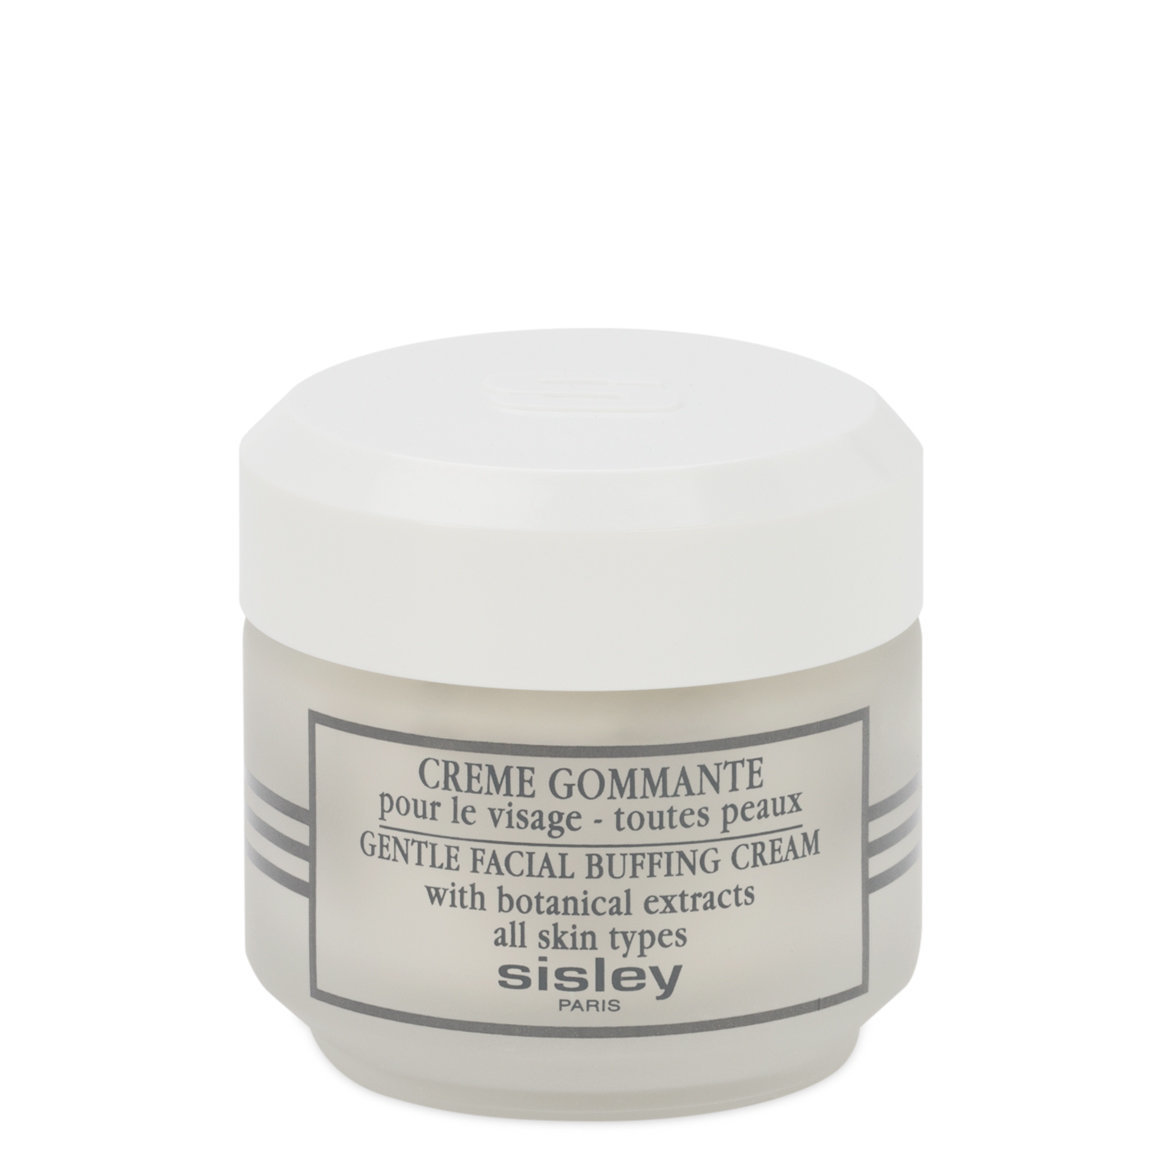 Sisley-Paris Gentle Facial Buffing Cream alternative view 1 - product swatch.